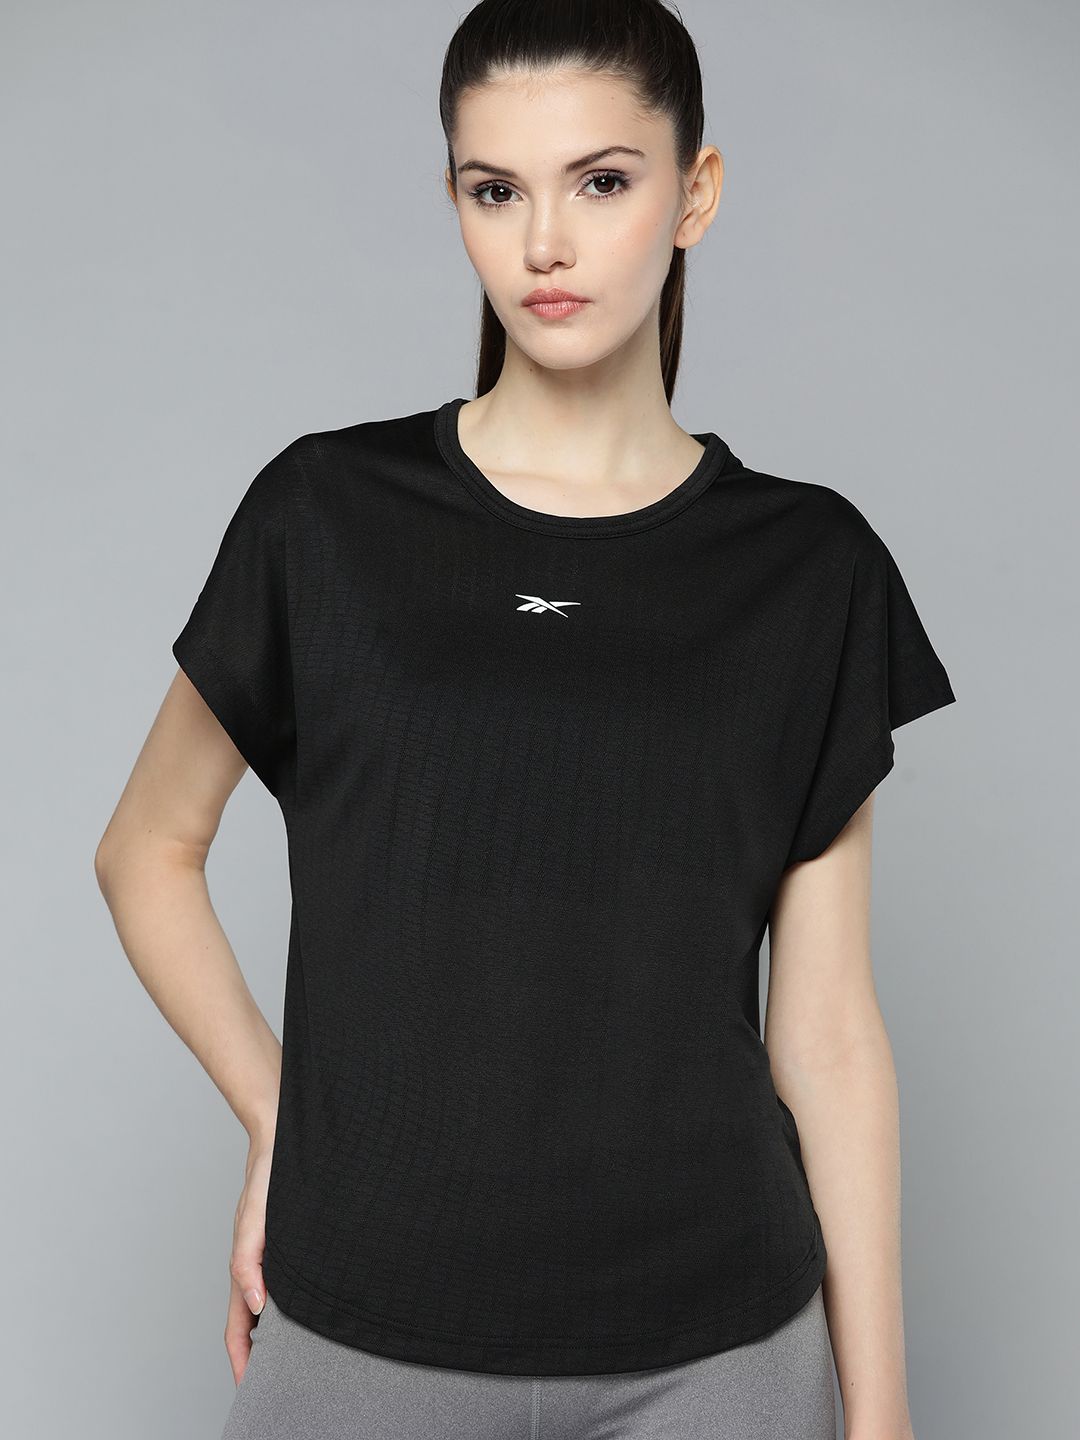 Reebok Women Black Extended Sleeves UBF Perforated T-shirt Price in India